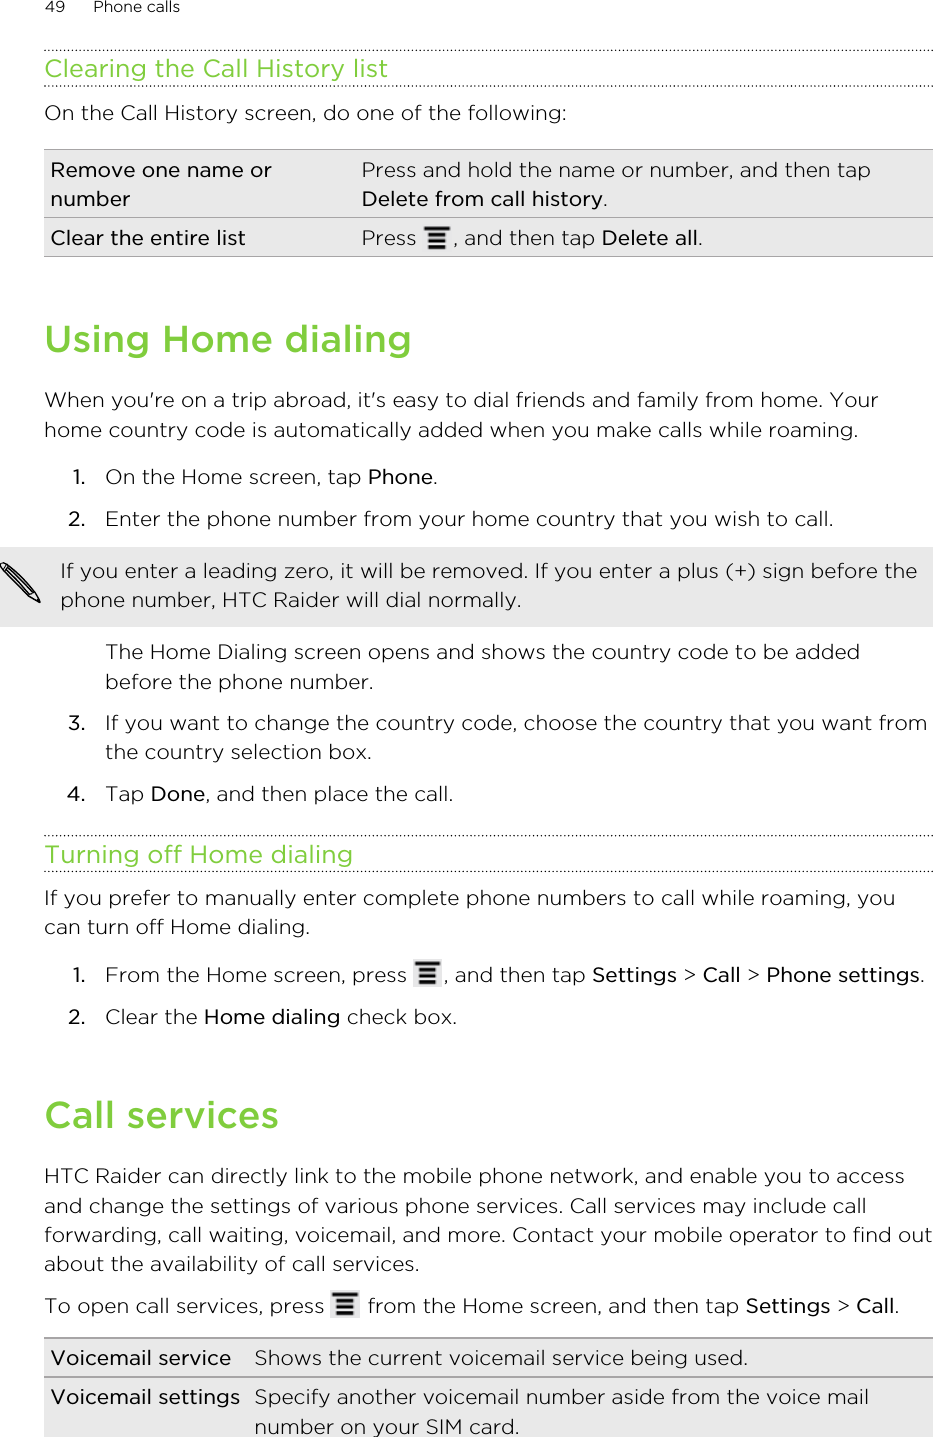 Clearing the Call History listOn the Call History screen, do one of the following:Remove one name ornumberPress and hold the name or number, and then tapDelete from call history.Clear the entire list Press  , and then tap Delete all.Using Home dialingWhen you&apos;re on a trip abroad, it&apos;s easy to dial friends and family from home. Yourhome country code is automatically added when you make calls while roaming.1. On the Home screen, tap Phone.2. Enter the phone number from your home country that you wish to call. If you enter a leading zero, it will be removed. If you enter a plus (+) sign before thephone number, HTC Raider will dial normally.The Home Dialing screen opens and shows the country code to be addedbefore the phone number.3. If you want to change the country code, choose the country that you want fromthe country selection box.4. Tap Done, and then place the call.Turning off Home dialingIf you prefer to manually enter complete phone numbers to call while roaming, youcan turn off Home dialing.1. From the Home screen, press  , and then tap Settings &gt; Call &gt; Phone settings.2. Clear the Home dialing check box.Call servicesHTC Raider can directly link to the mobile phone network, and enable you to accessand change the settings of various phone services. Call services may include callforwarding, call waiting, voicemail, and more. Contact your mobile operator to find outabout the availability of call services.To open call services, press   from the Home screen, and then tap Settings &gt; Call.Voicemail service Shows the current voicemail service being used.Voicemail settings Specify another voicemail number aside from the voice mailnumber on your SIM card.49 Phone calls